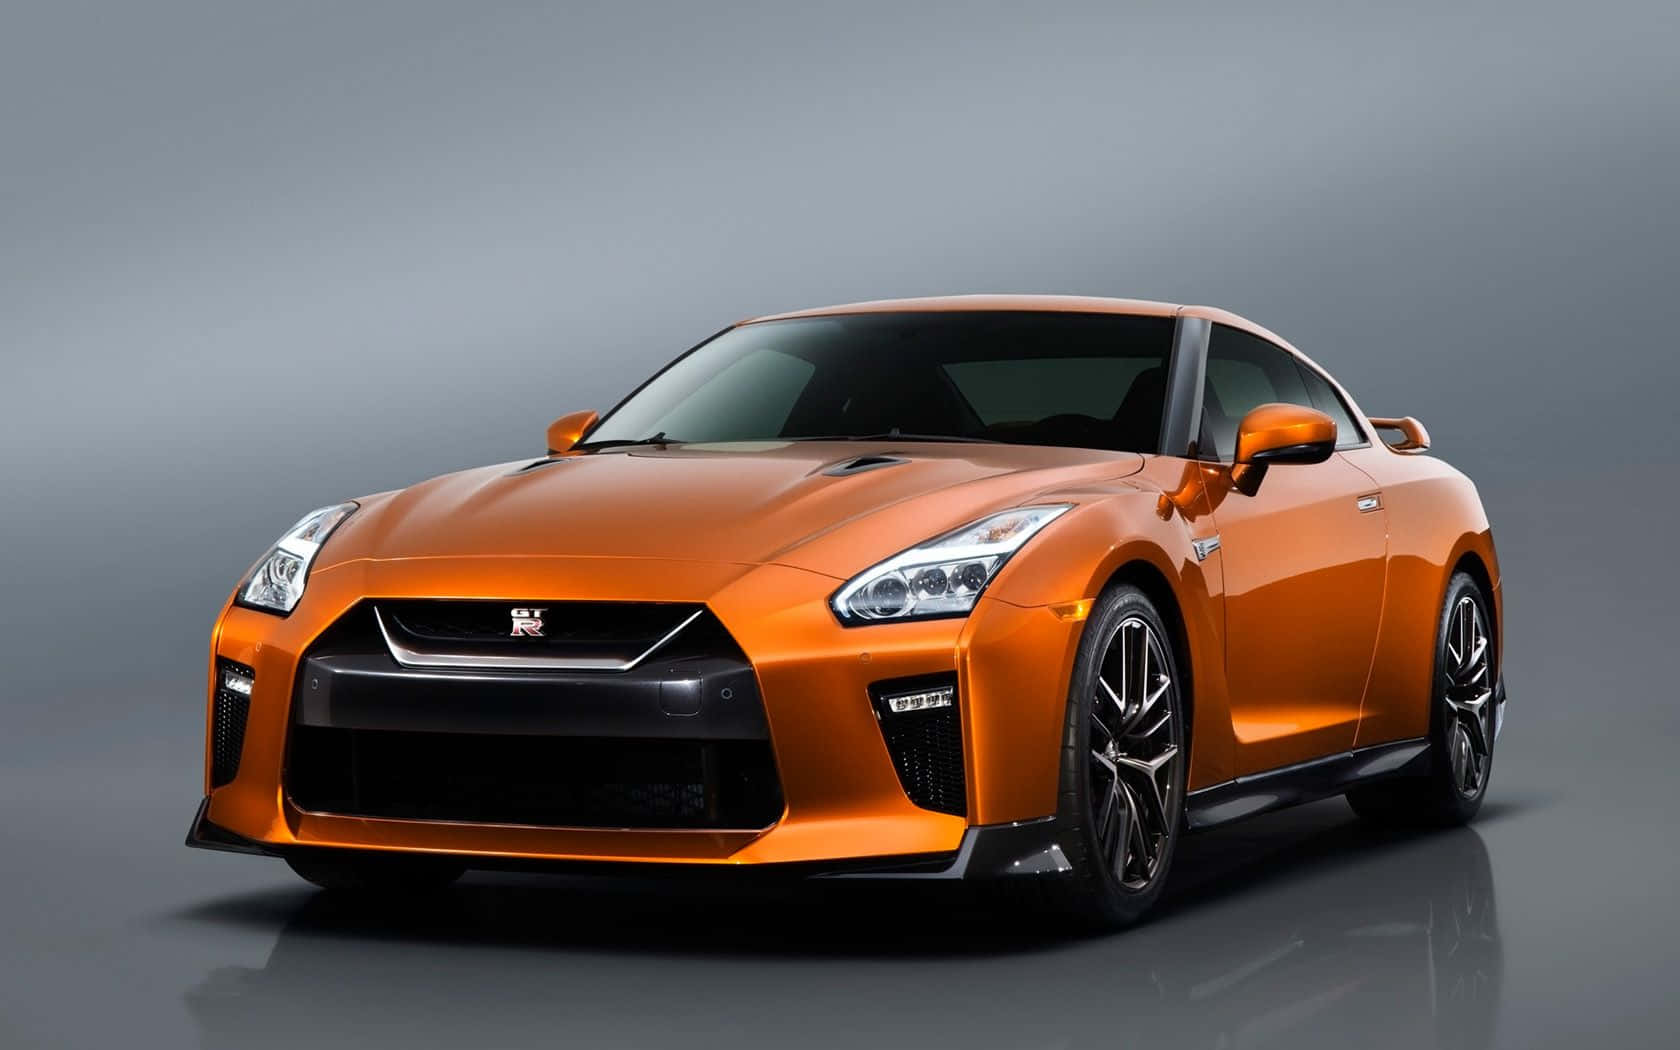 This Cool Gtr Will Make You Feel Like A Formula One Driver